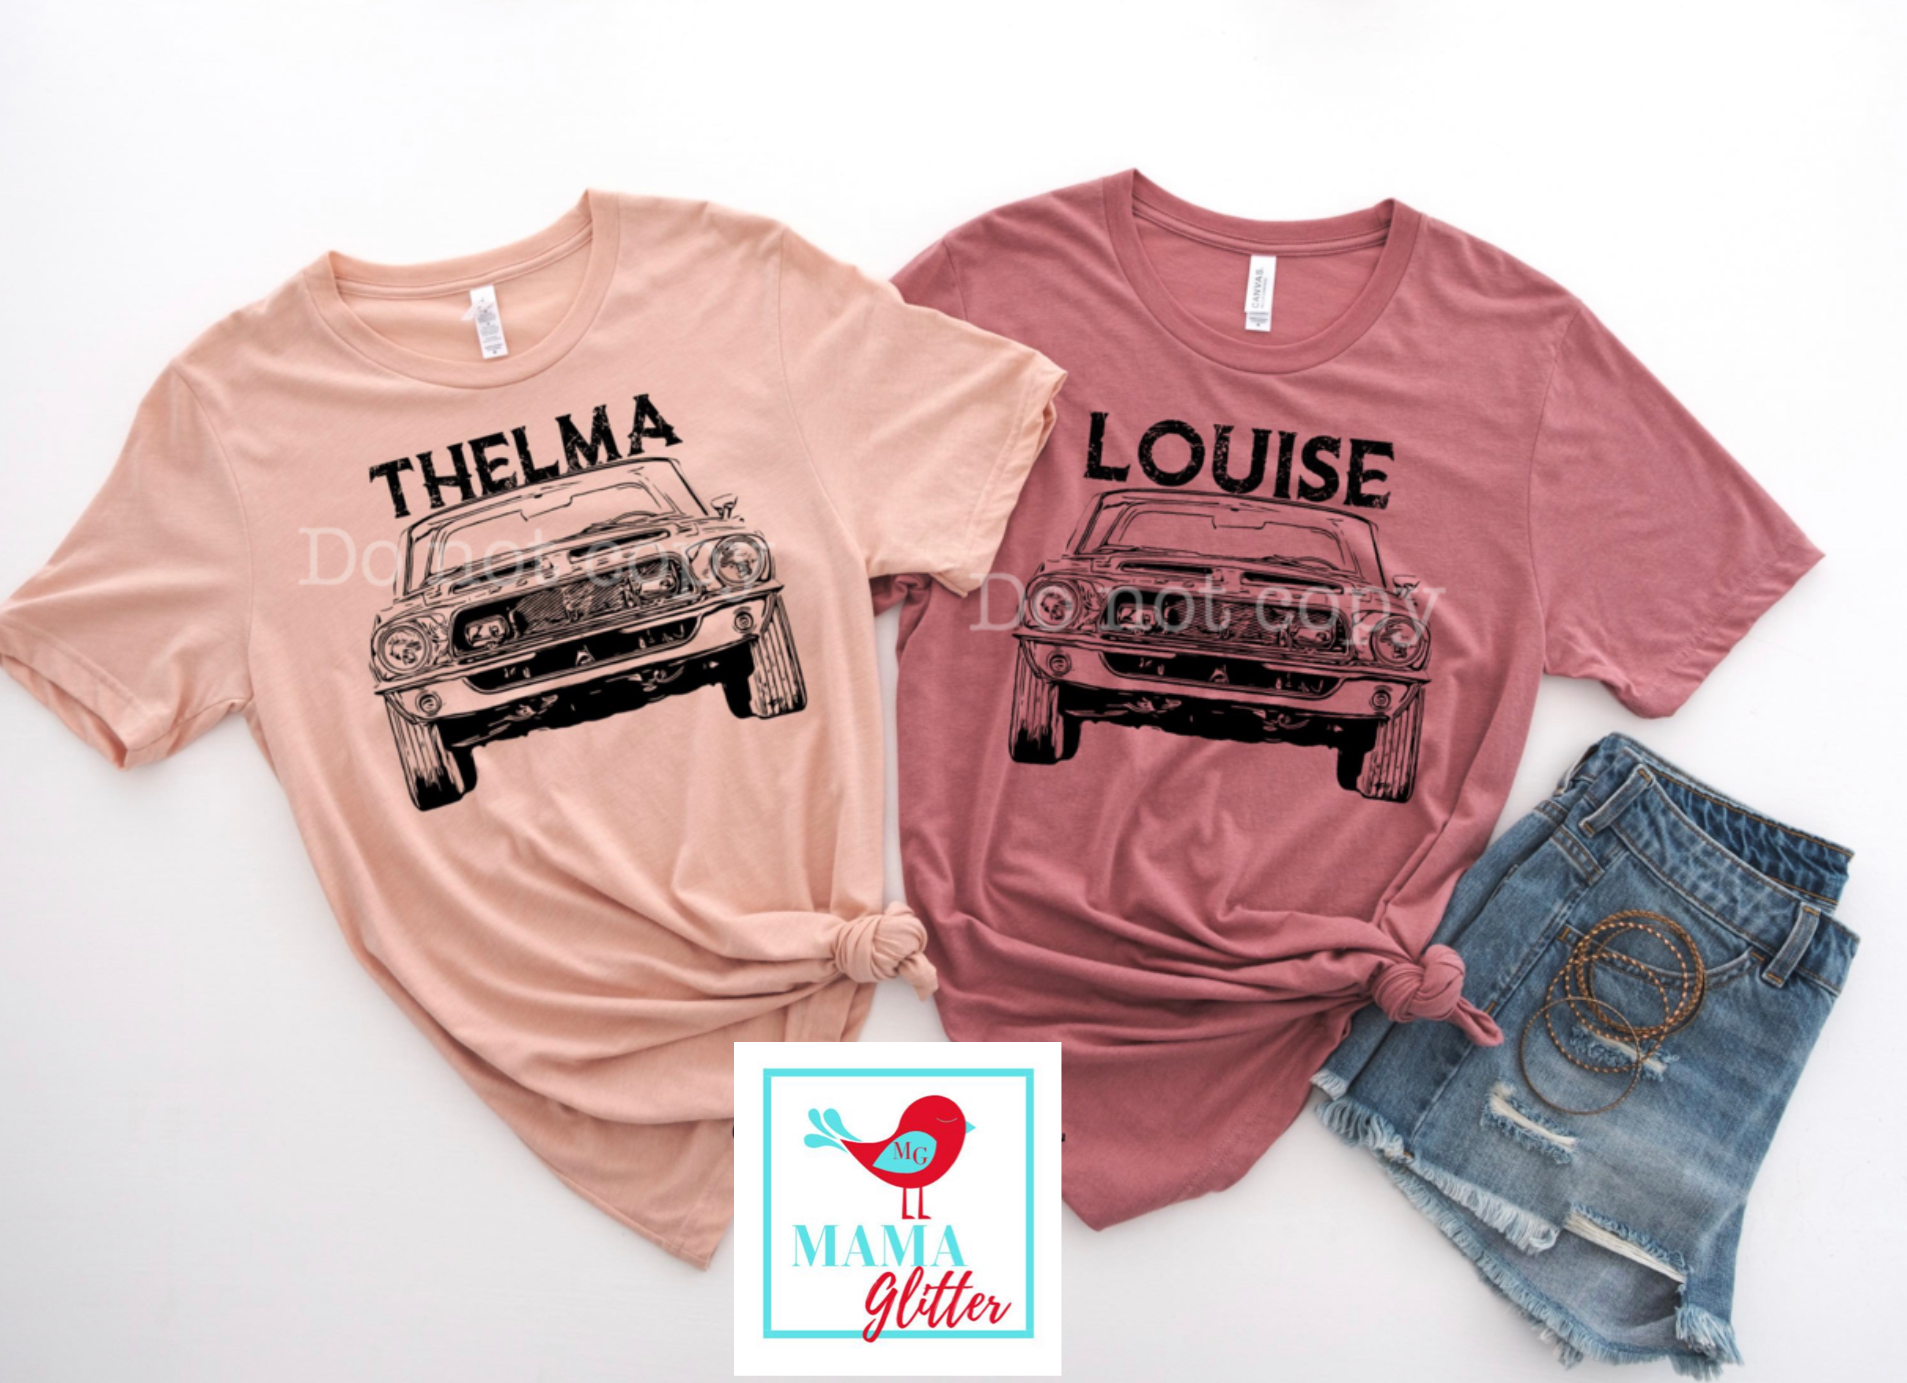 Thelma & Louise Best Friends Shirts - Thelma